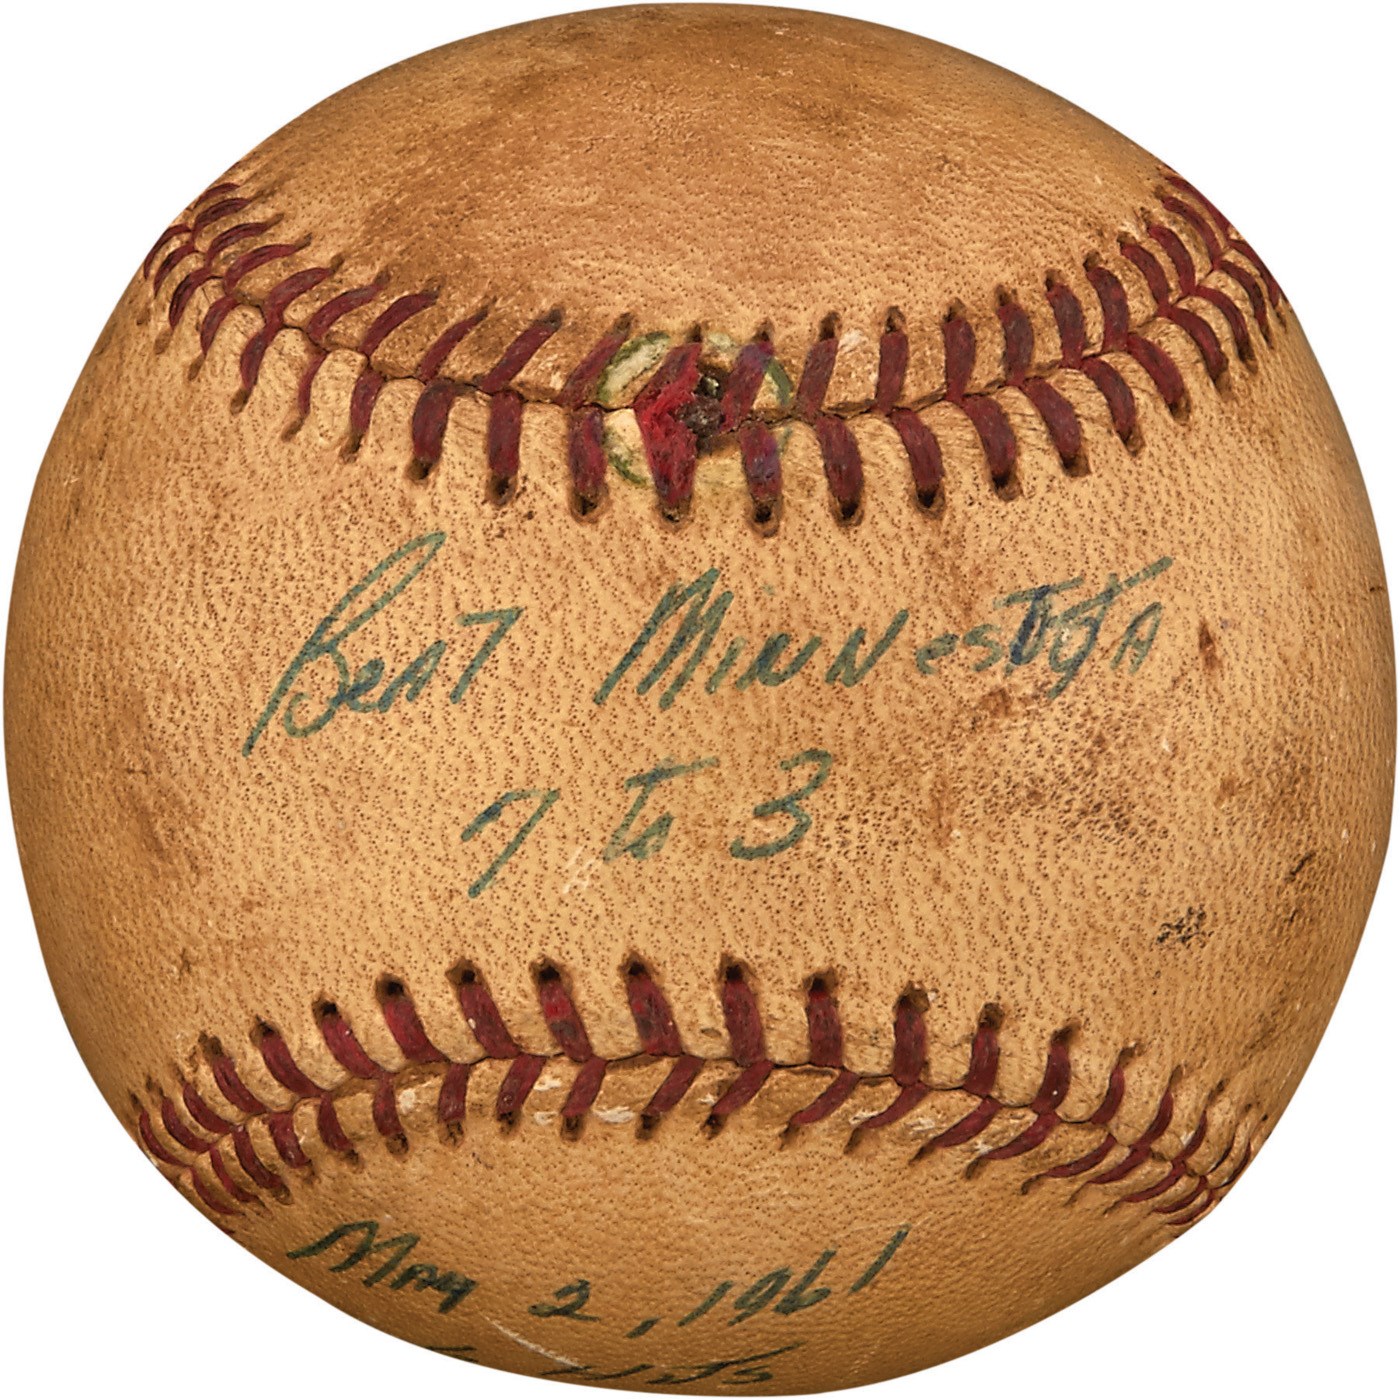 Mantle and Maris - 1961 Roger Maris Game Ball from Home Run #2 (ex-Bob Turley Collection)